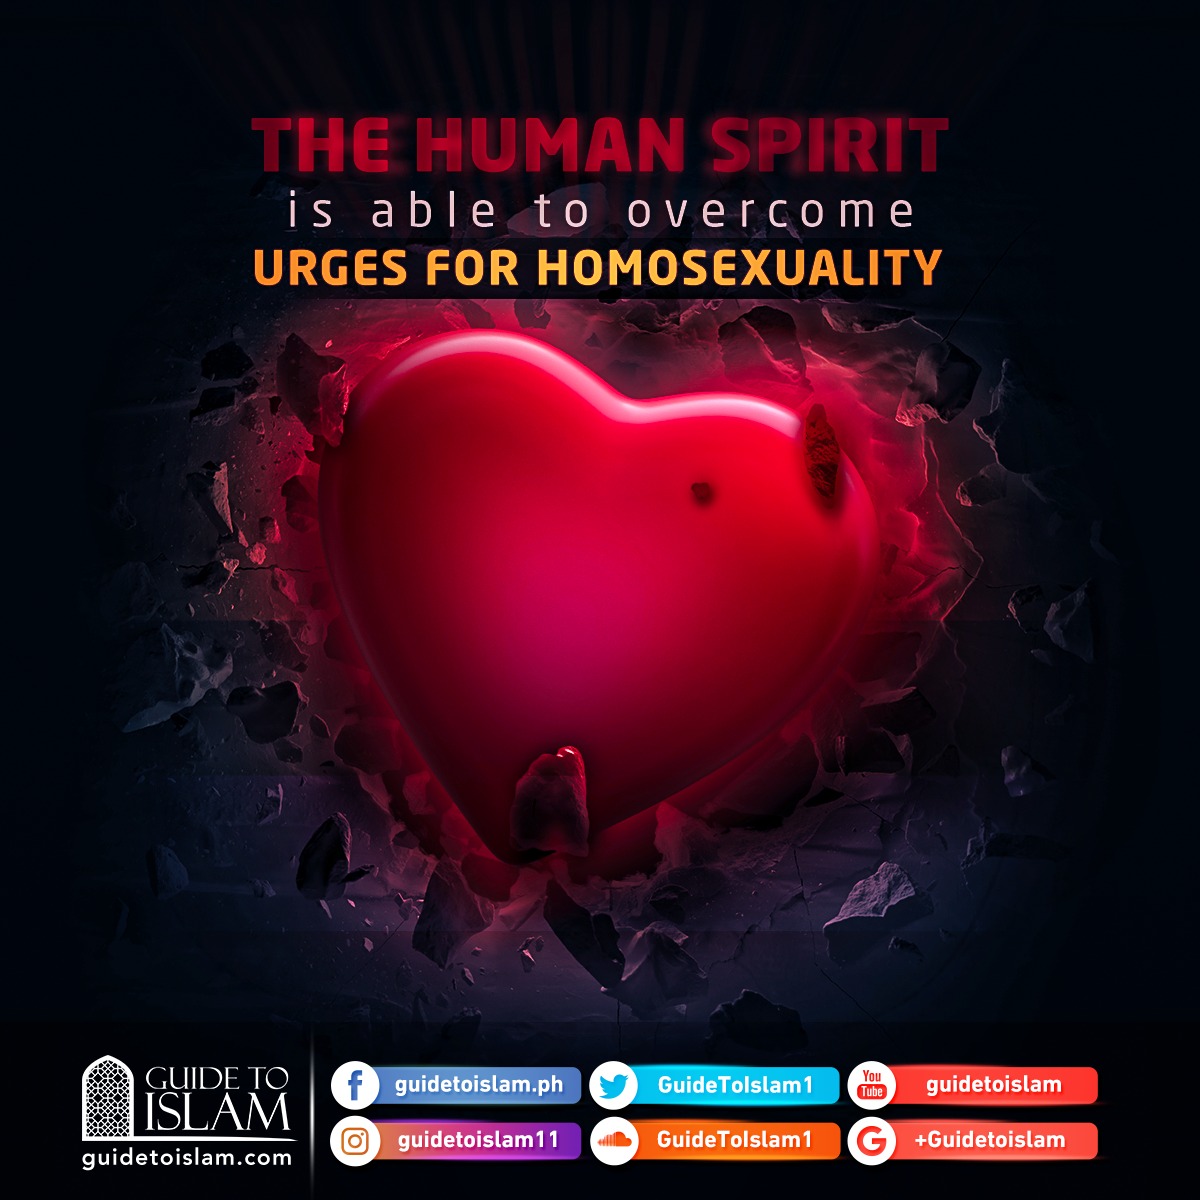 The human spirit is able to overcome urges for homosexuality